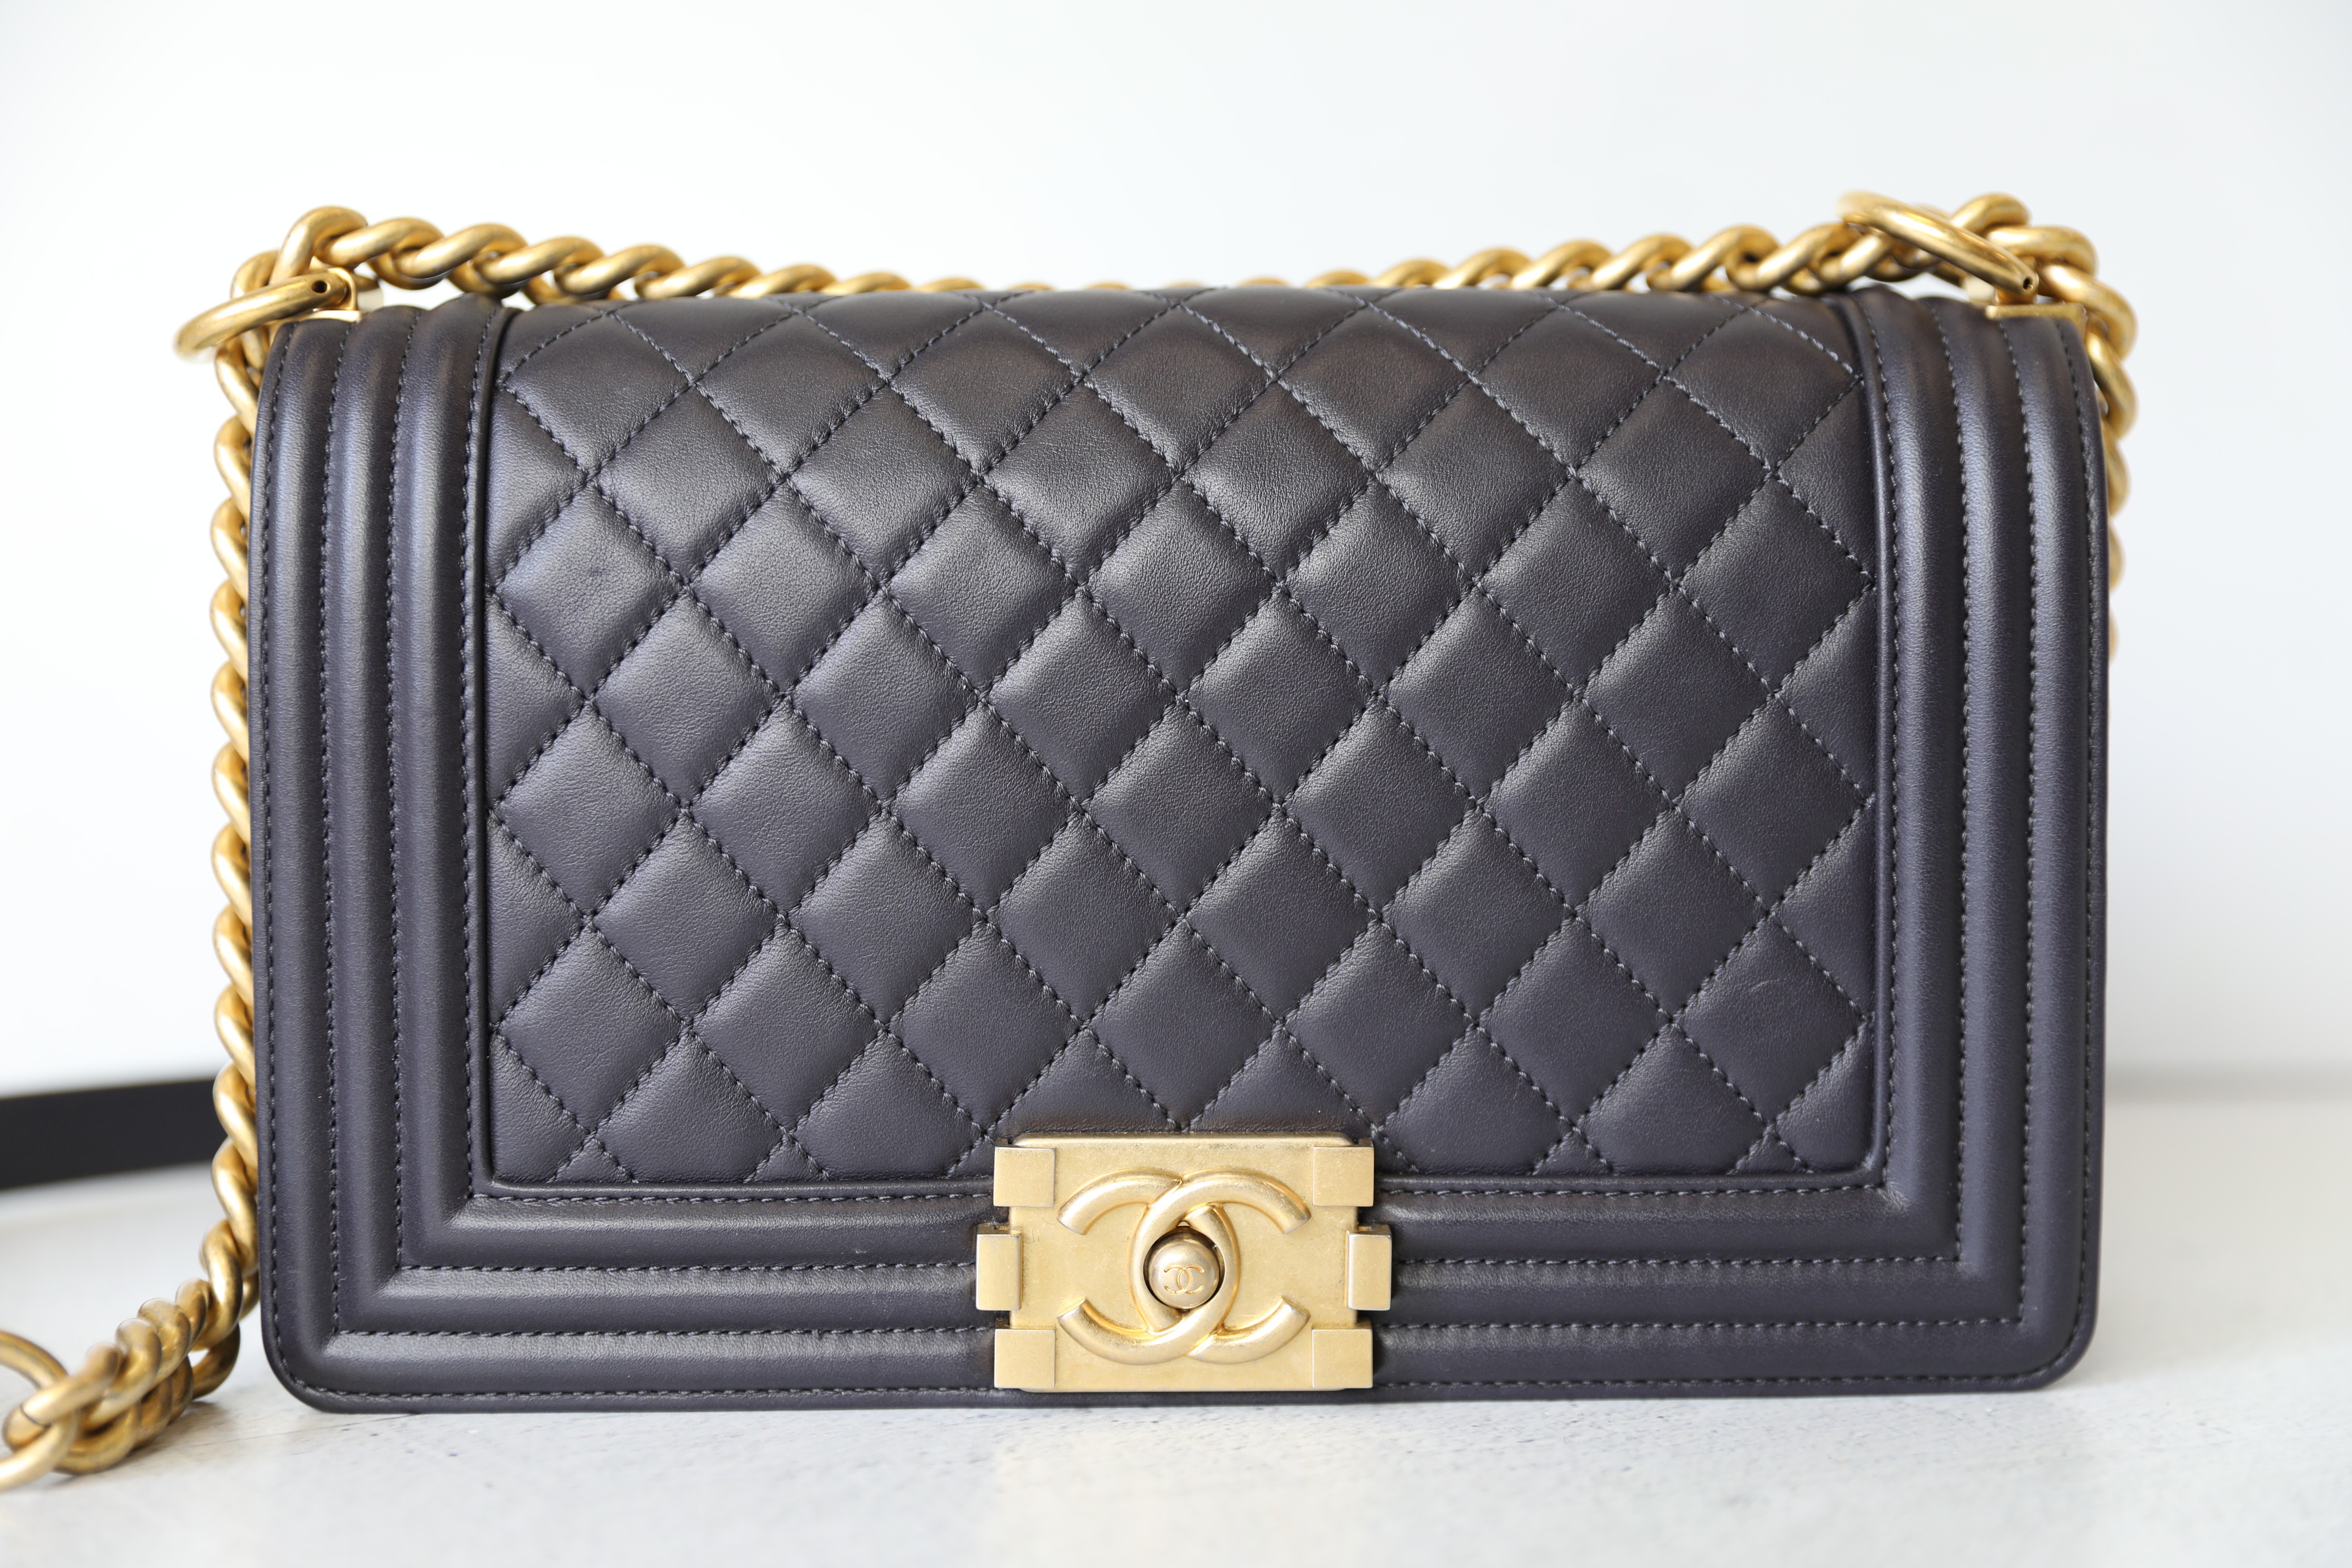 Chanel Shopping Tote, Black Purple Blue Wool with Gold Hardware, Preowned  in Dustbag WA001 - Julia Rose Boston